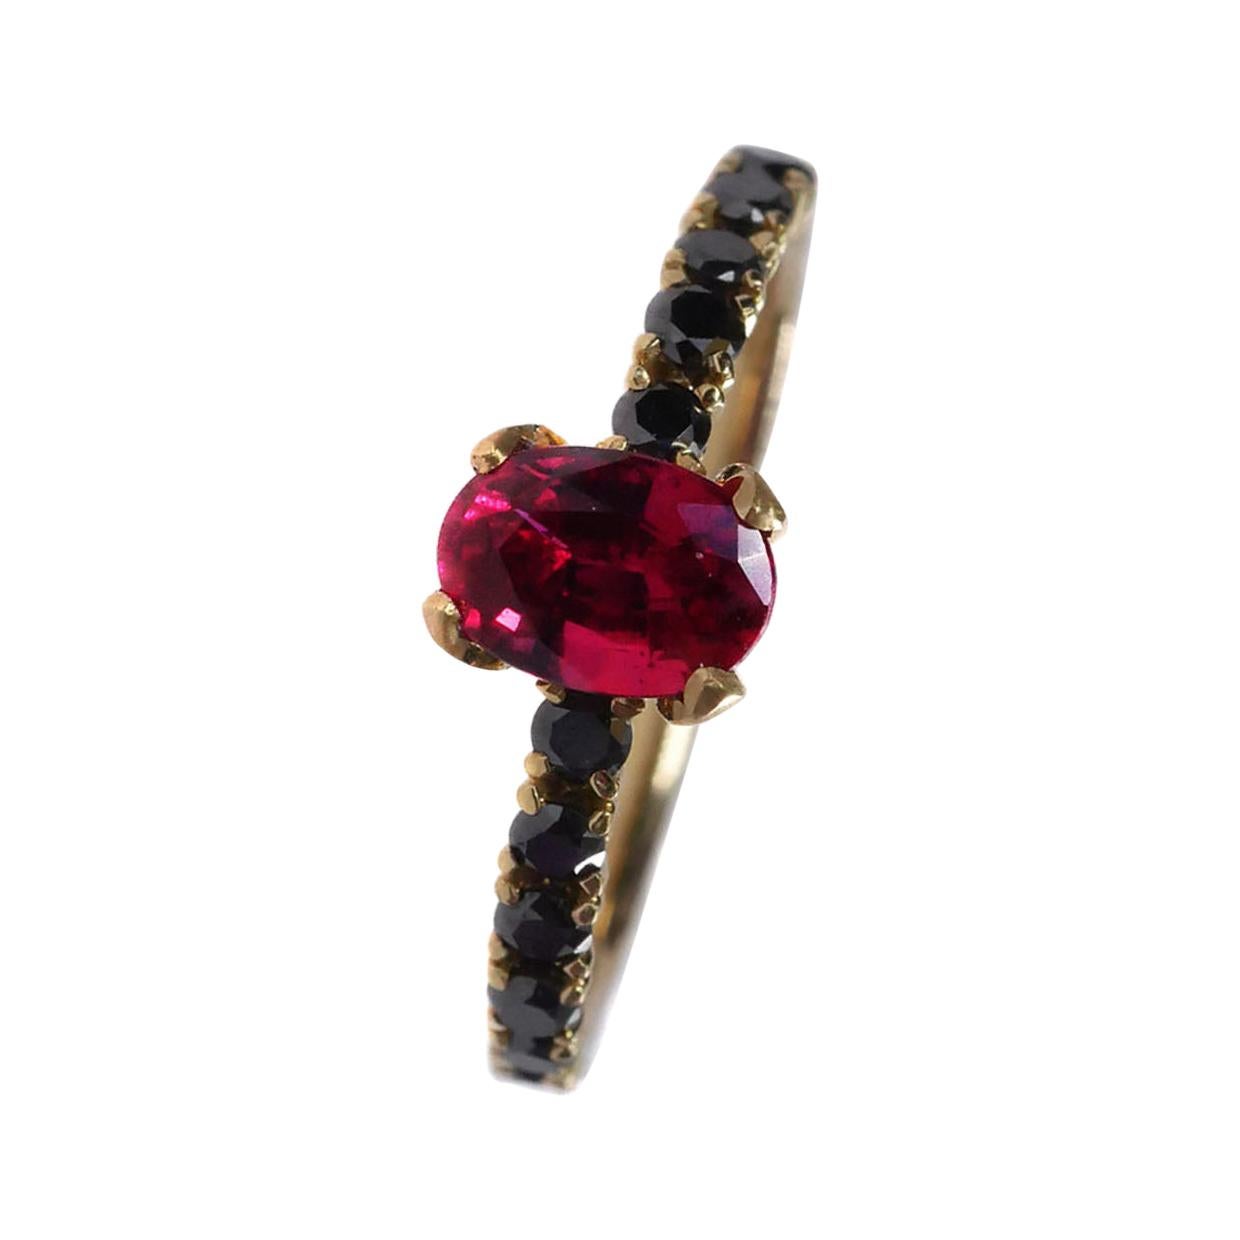 For Sale:  1 Carat Ruby and Black Diamond Solitaire Ring Set in 18 Karat Yellow Gold